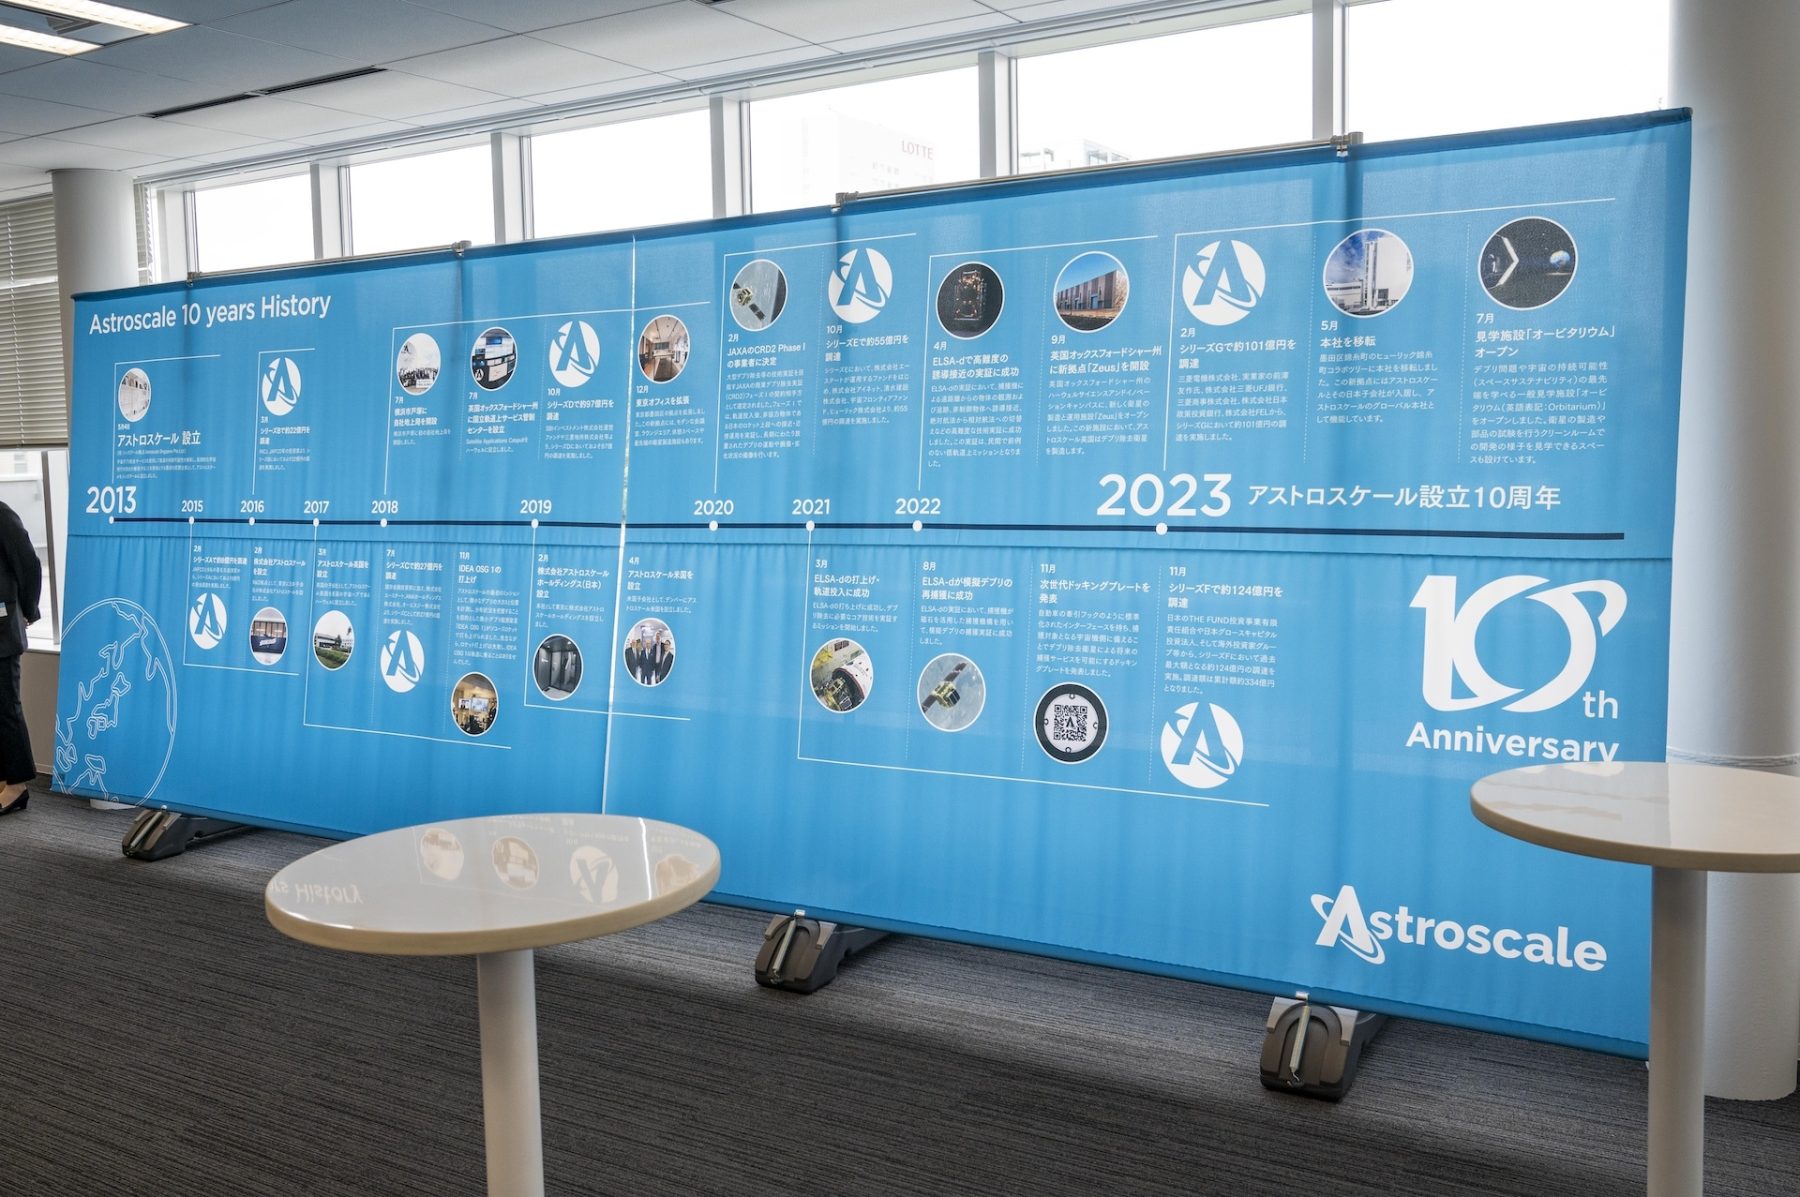 Astroscale 10th Anniversary & New office grand opening party